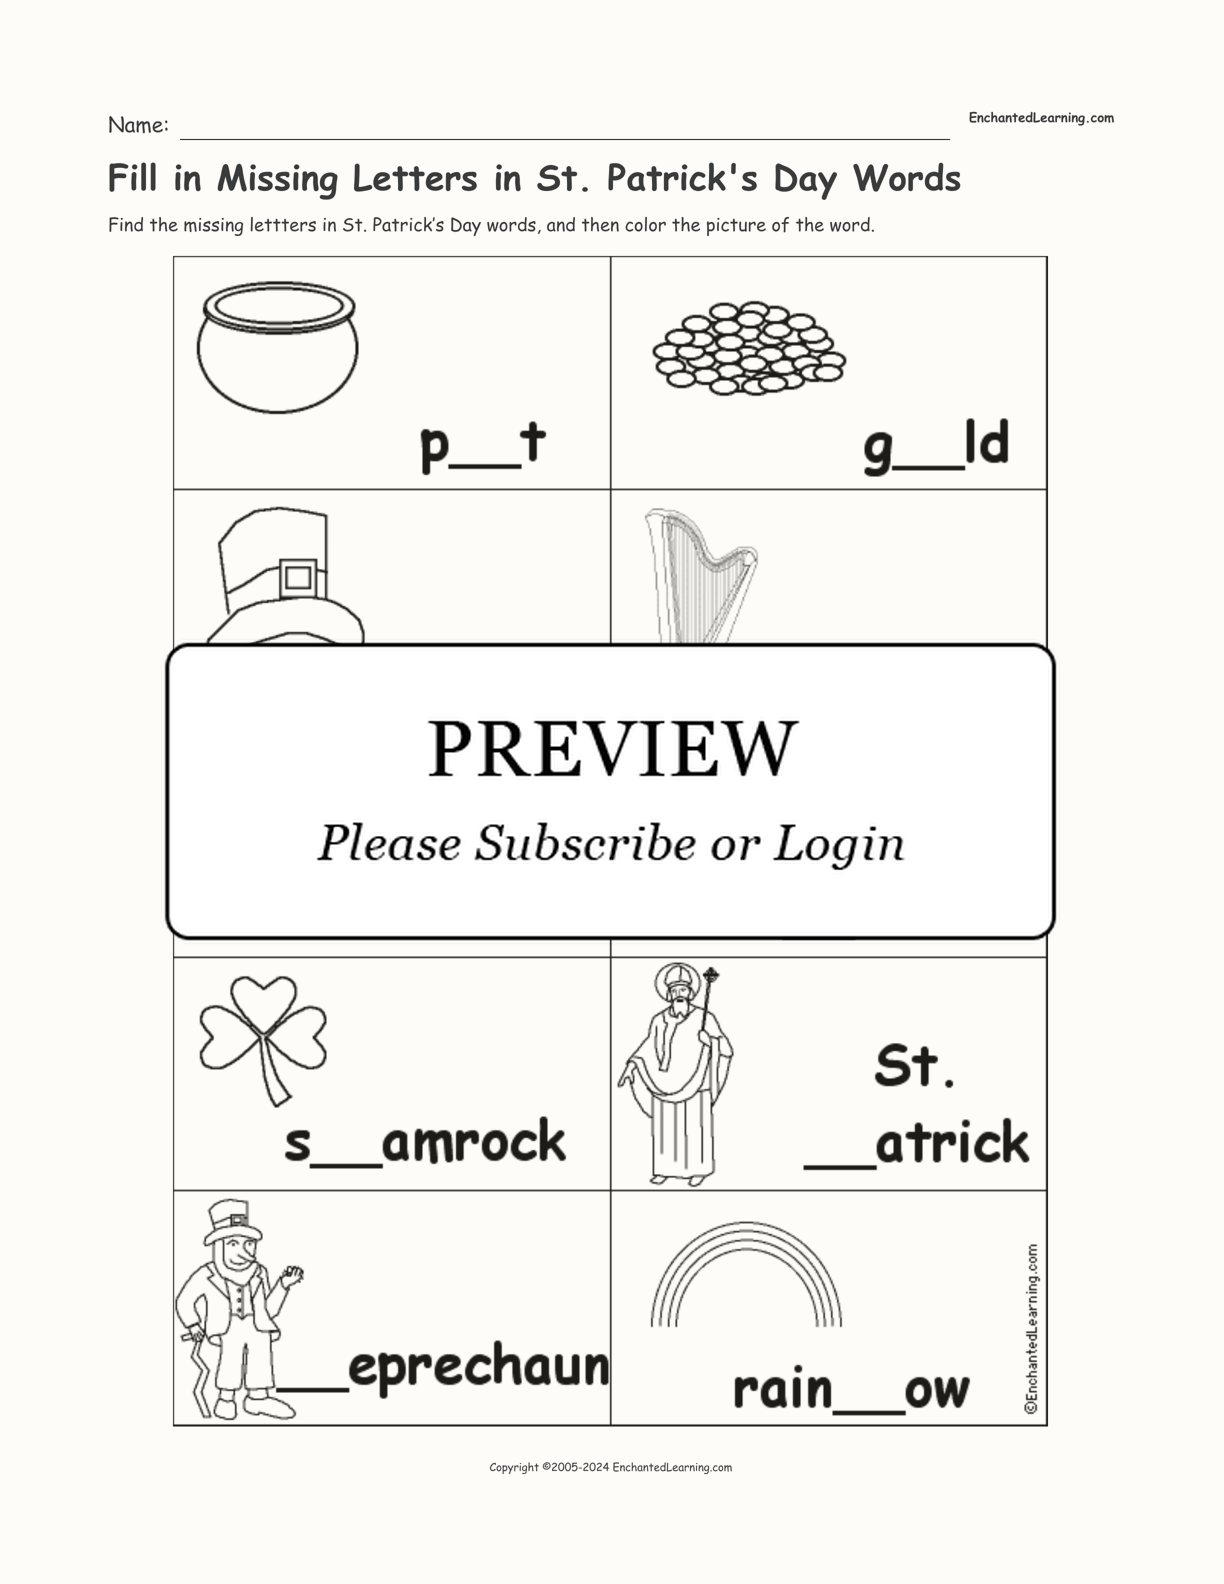 Fill in Missing Letters in St. Patrick's Day Words interactive worksheet page 1